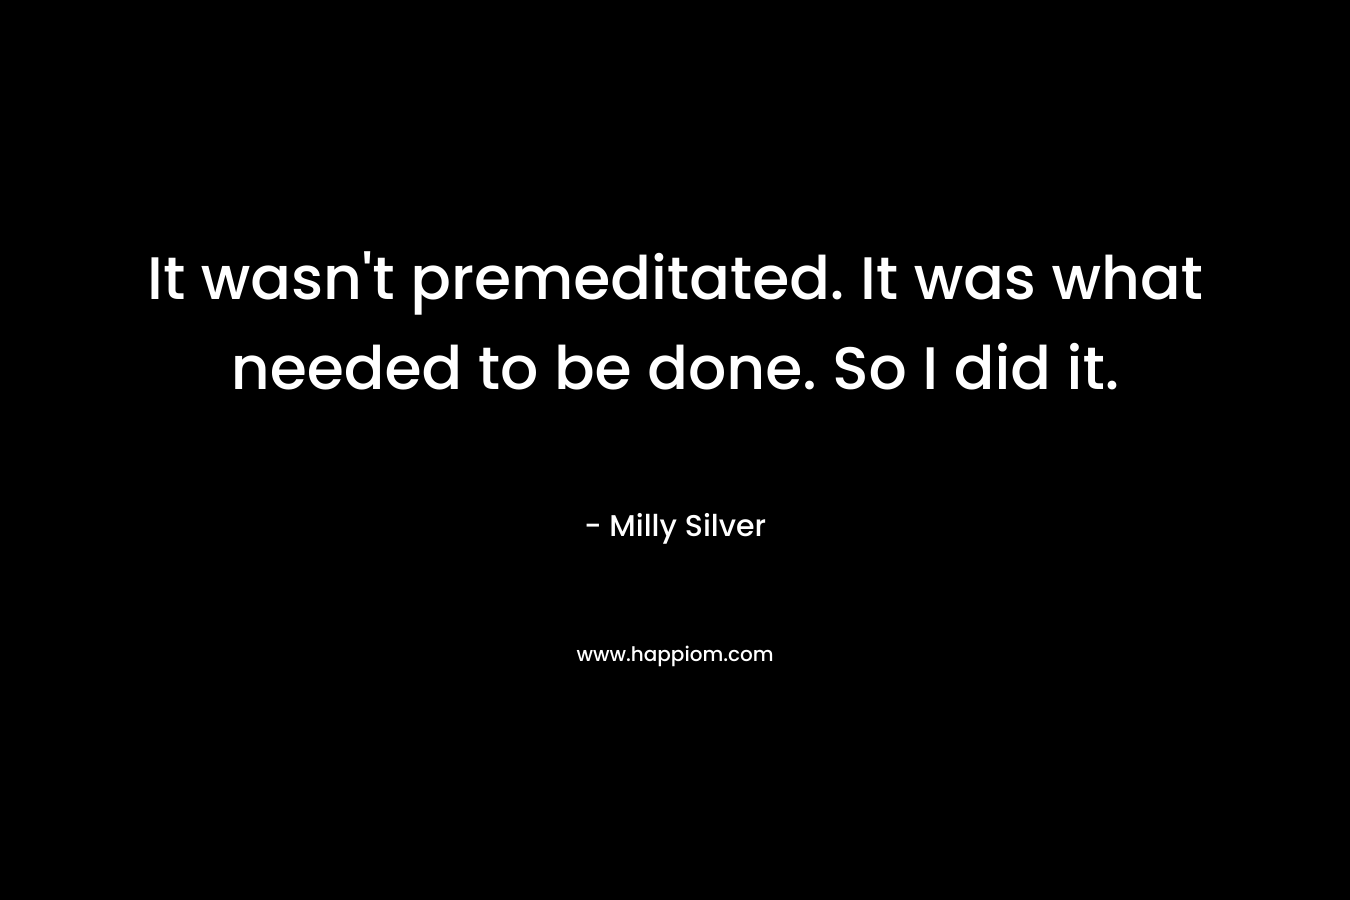 It wasn’t premeditated. It was what needed to be done. So I did it. – Milly Silver